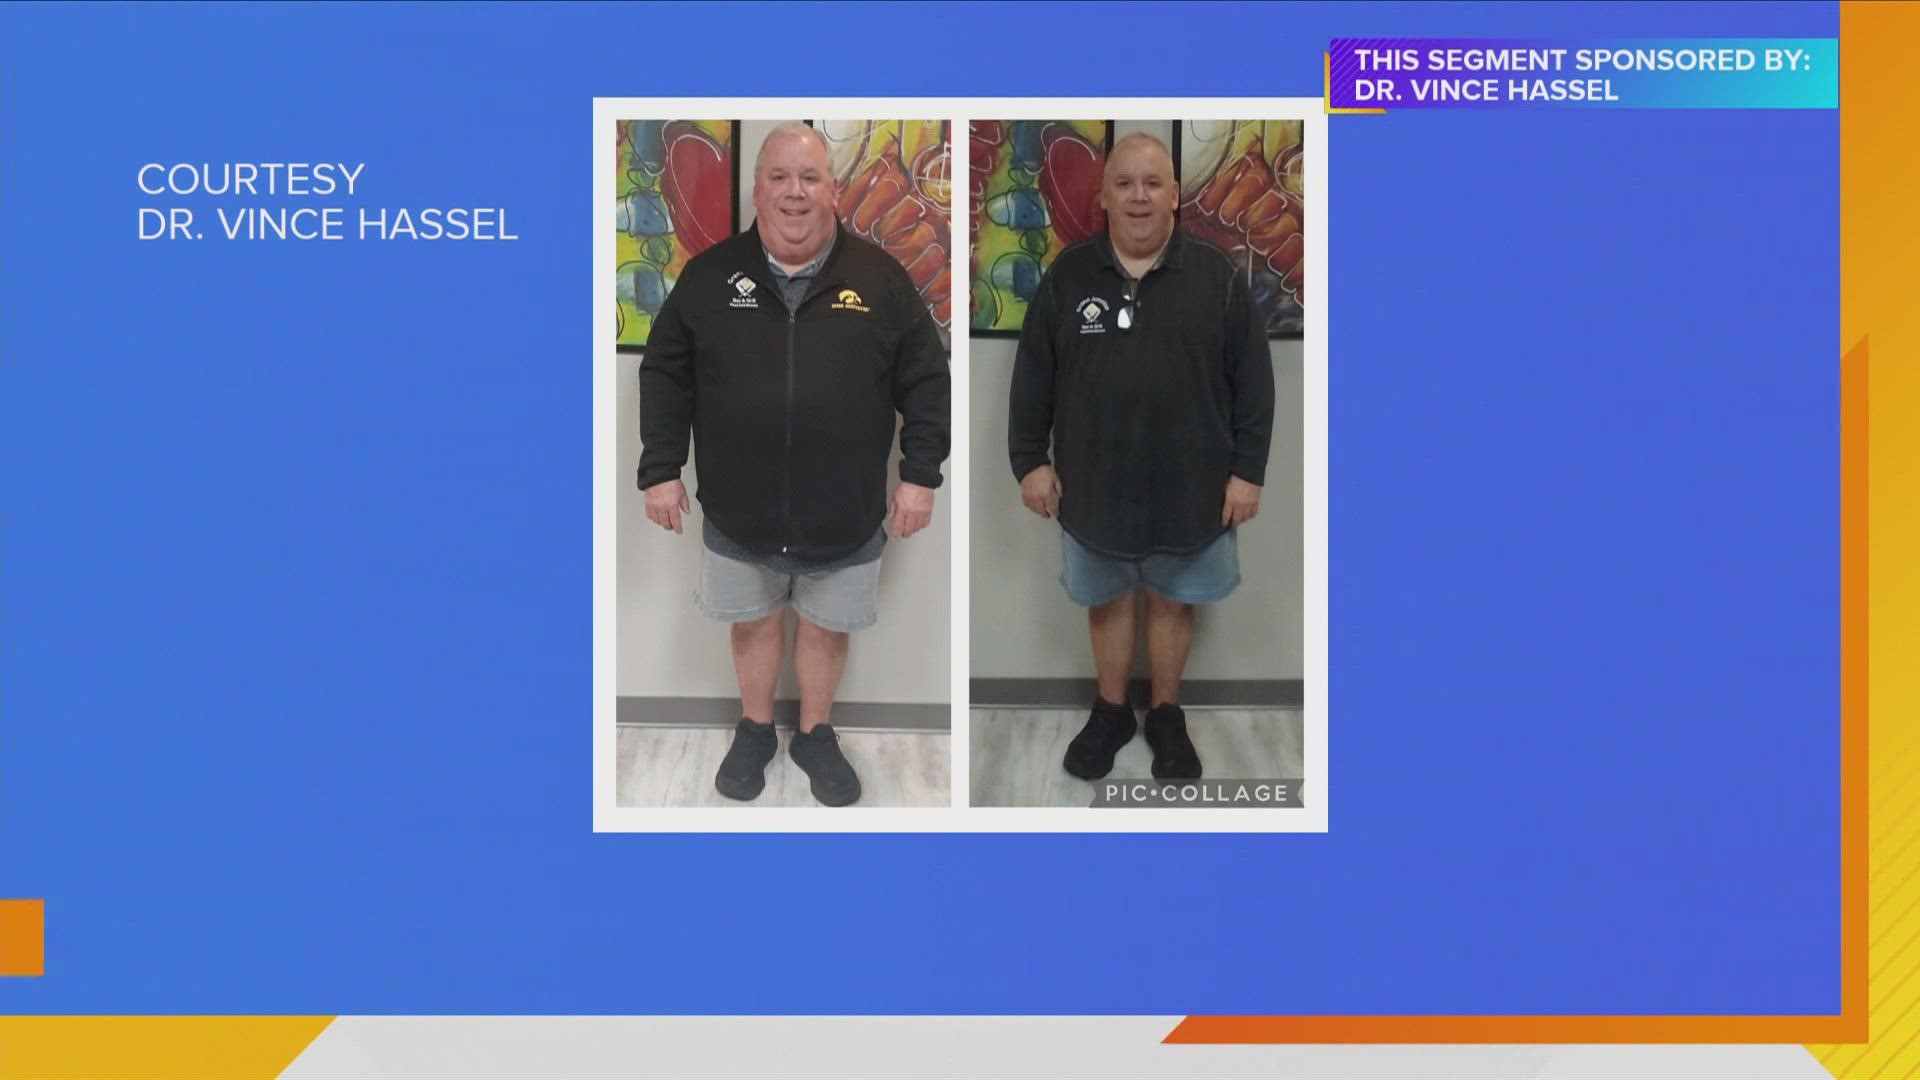 Chris Kenner lost 53 lbs in 42 days using Dr. Vince Hassel's ChiroThin weight loss program and has just started round two...He is now down 60 lbs! | Paid Content